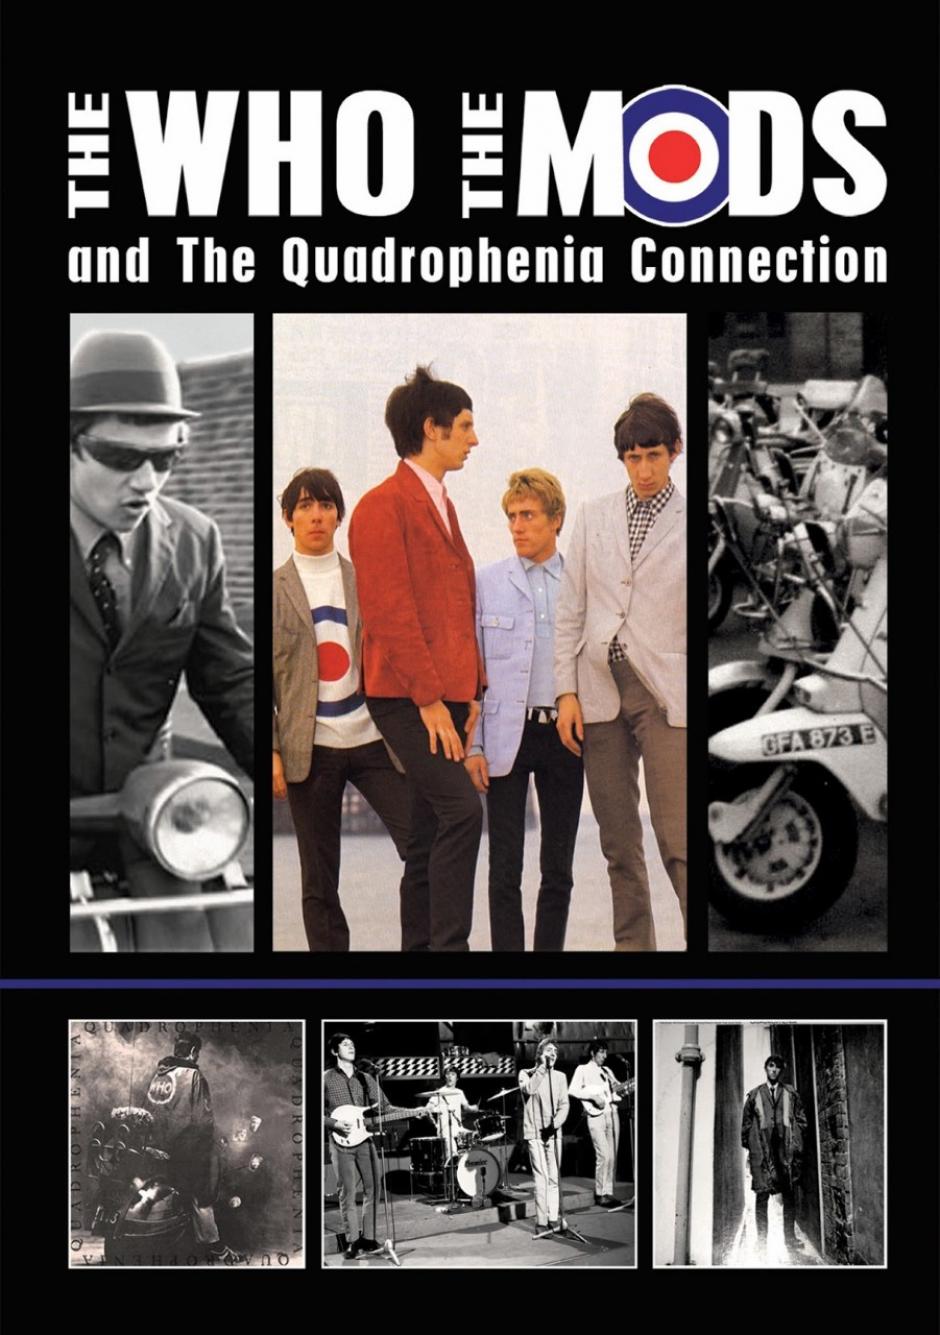 Portada del DVD 'The Who, the Mods and the Quadrophenia Connection'